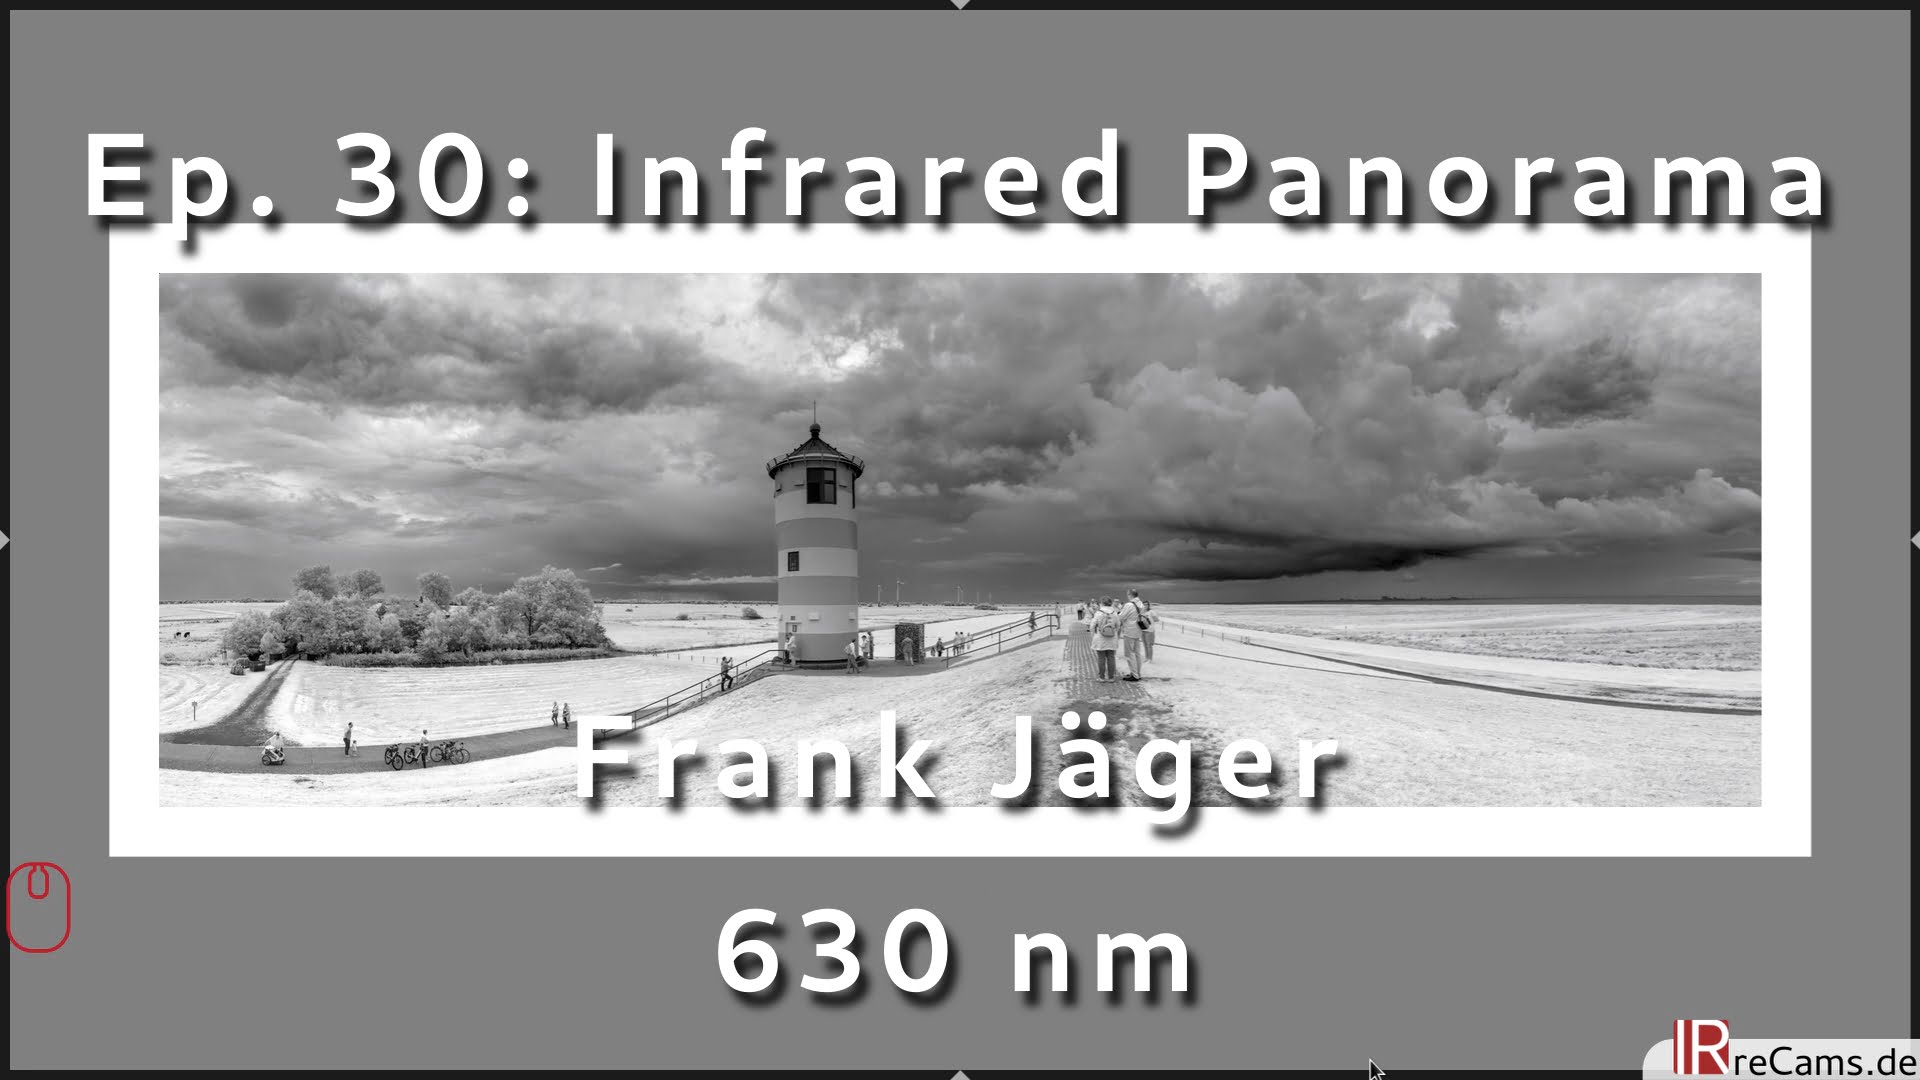 Ep. 30: How to create an Infrared Panorama with darktable and Hugin